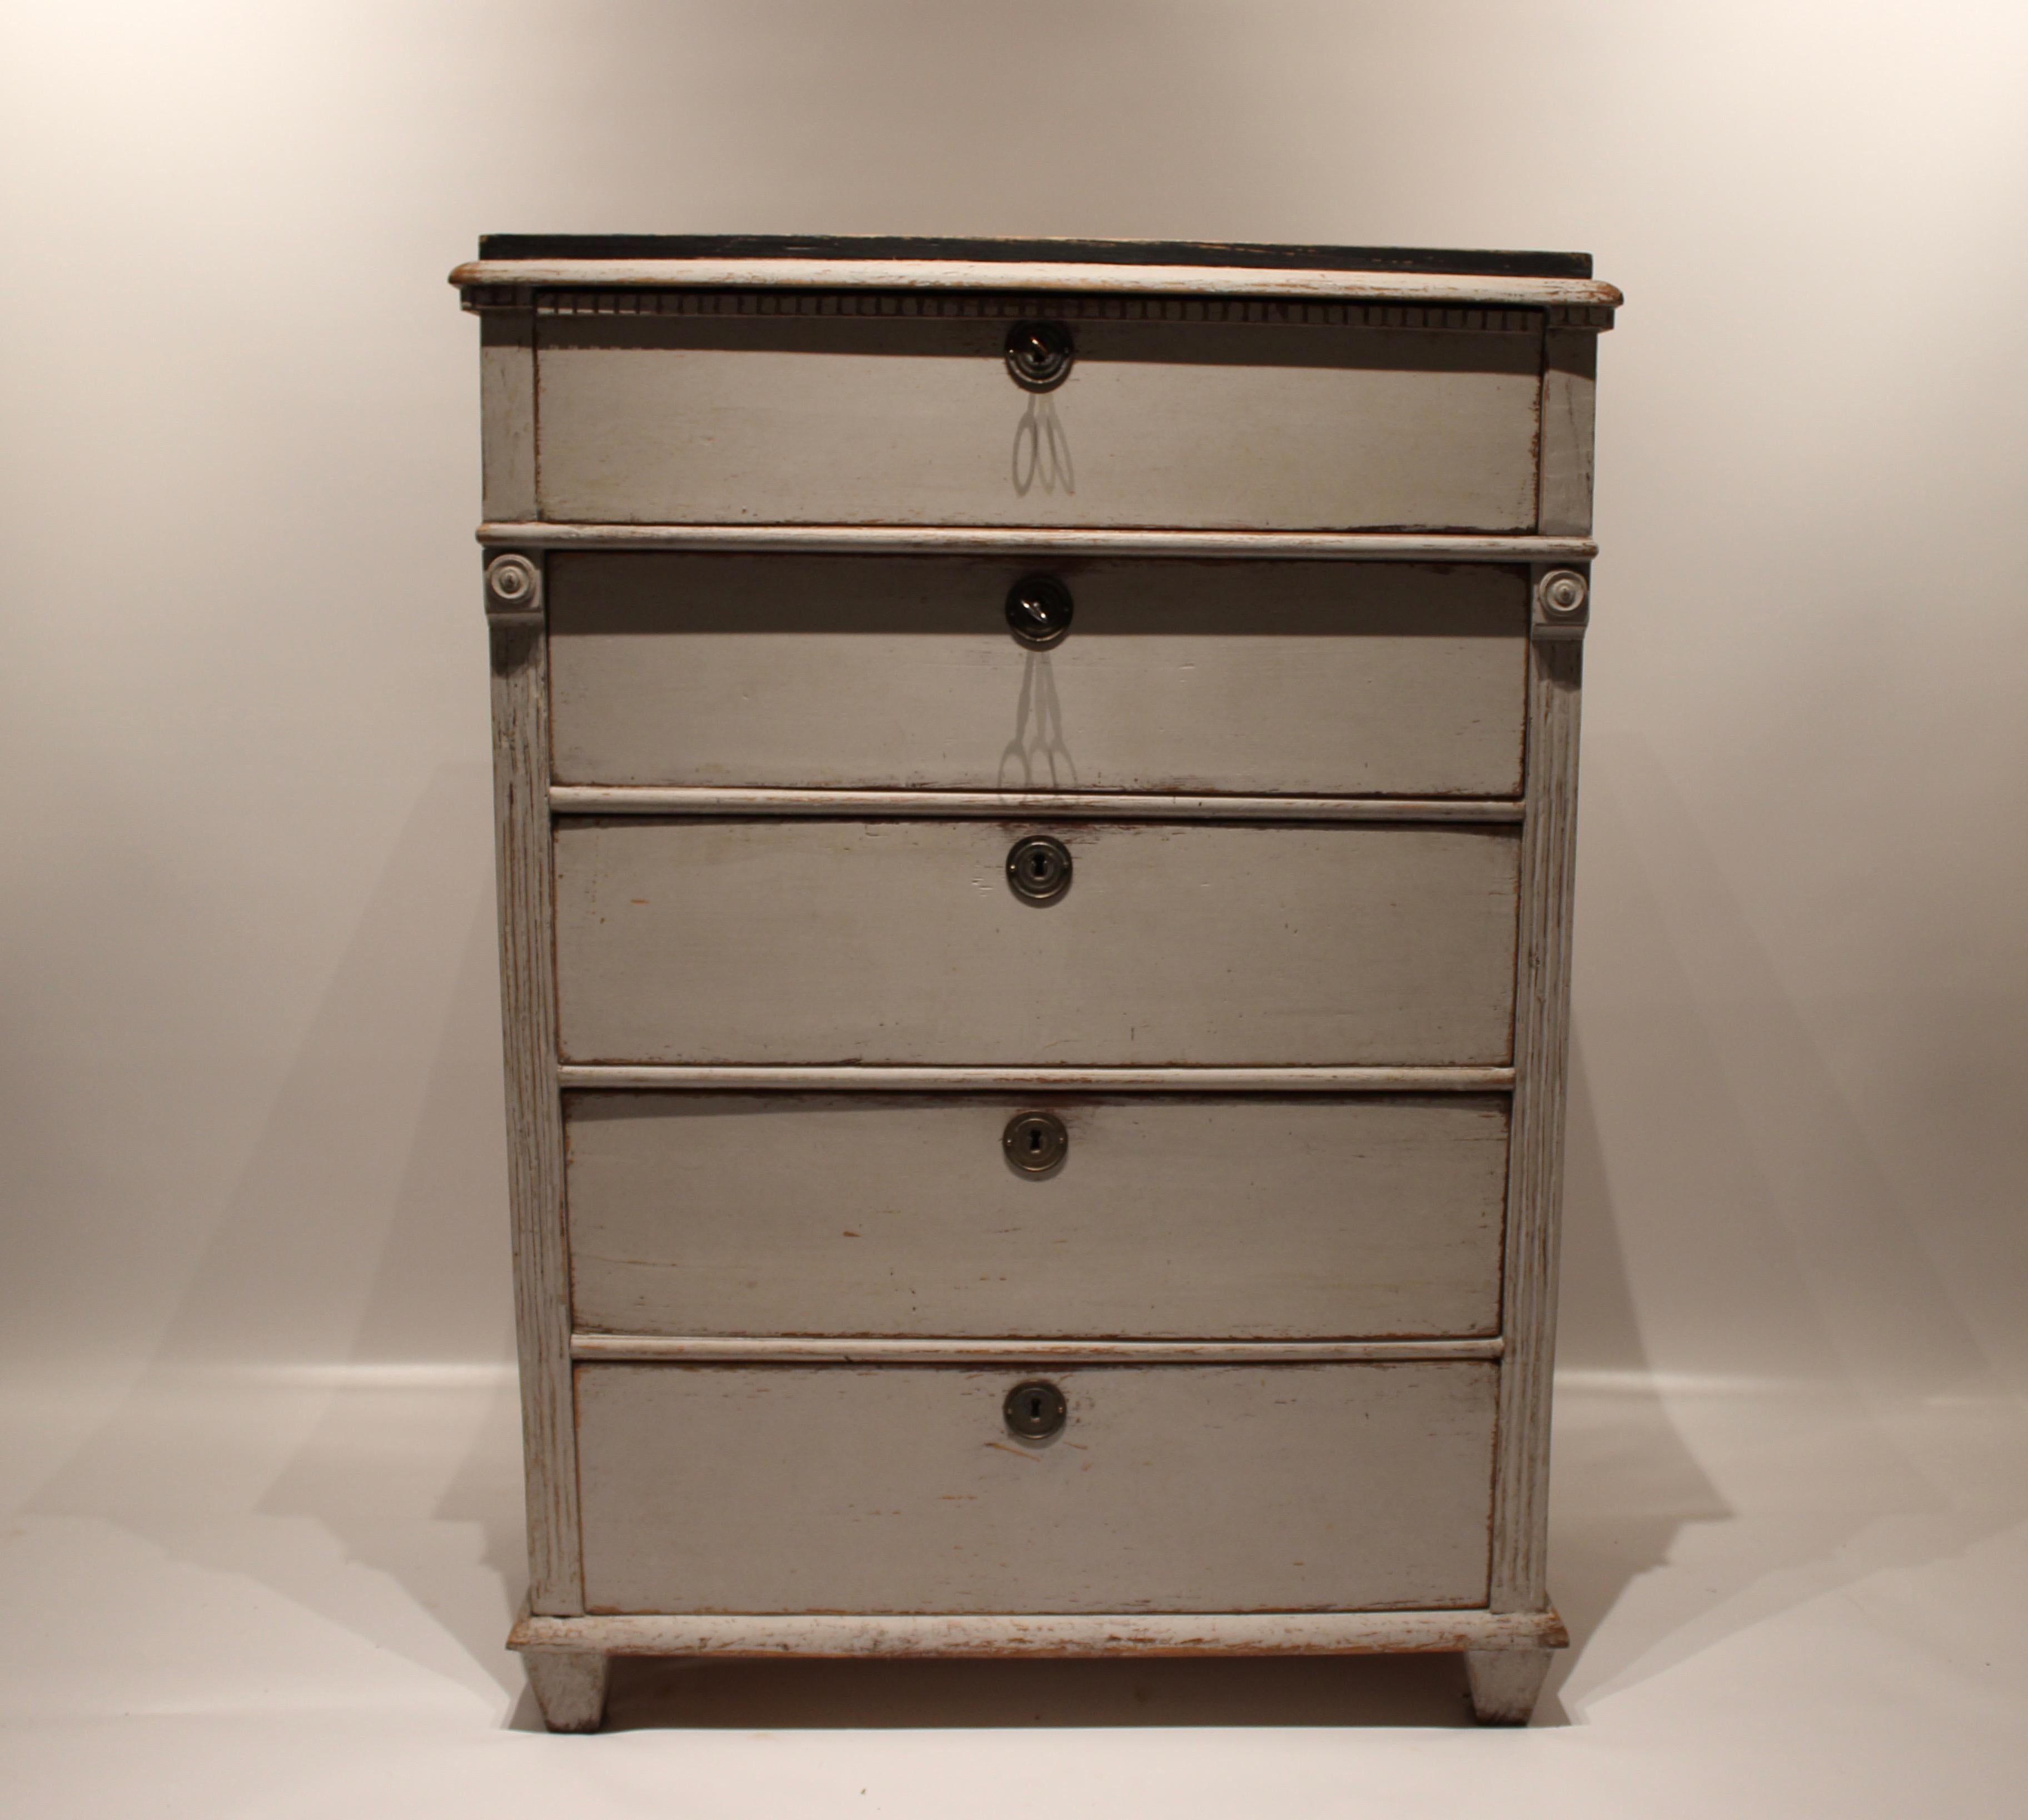 Gustavian grey painted chest of drawers with black topplate from the 1830s. The chest is in great vintage condition.